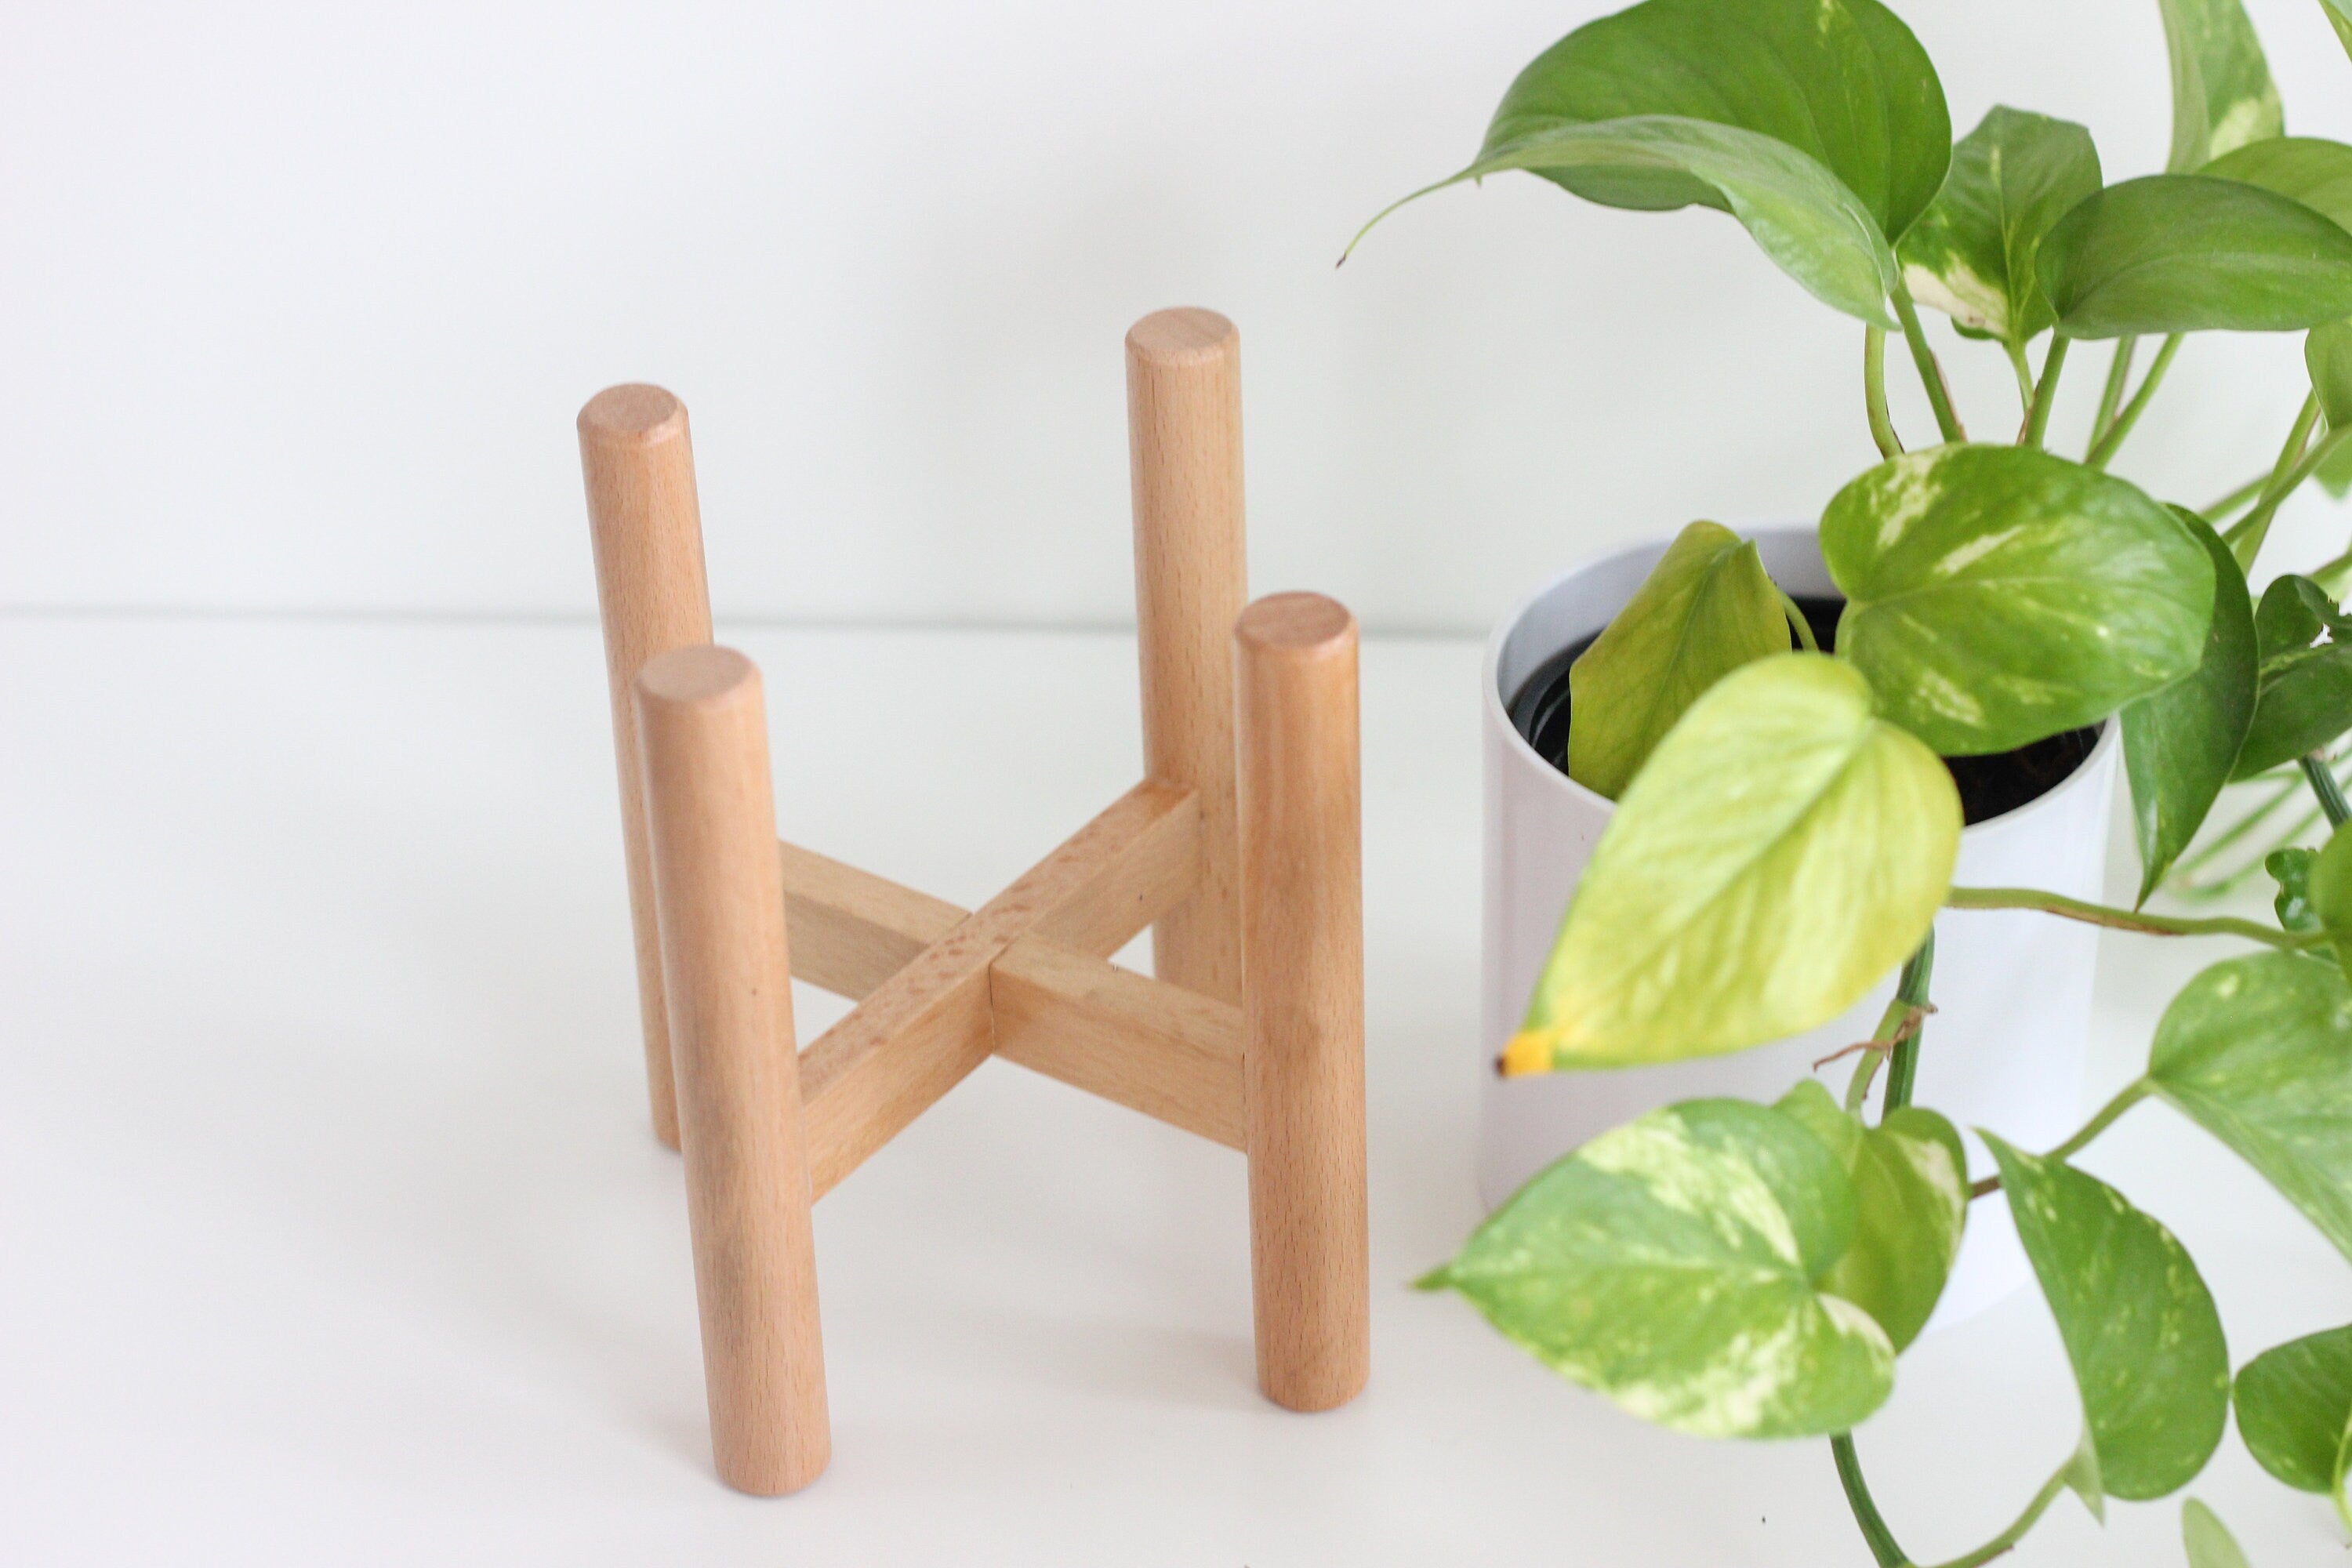 Mid-century Modern Wood Plant Stand with White Melamine Plant Pot